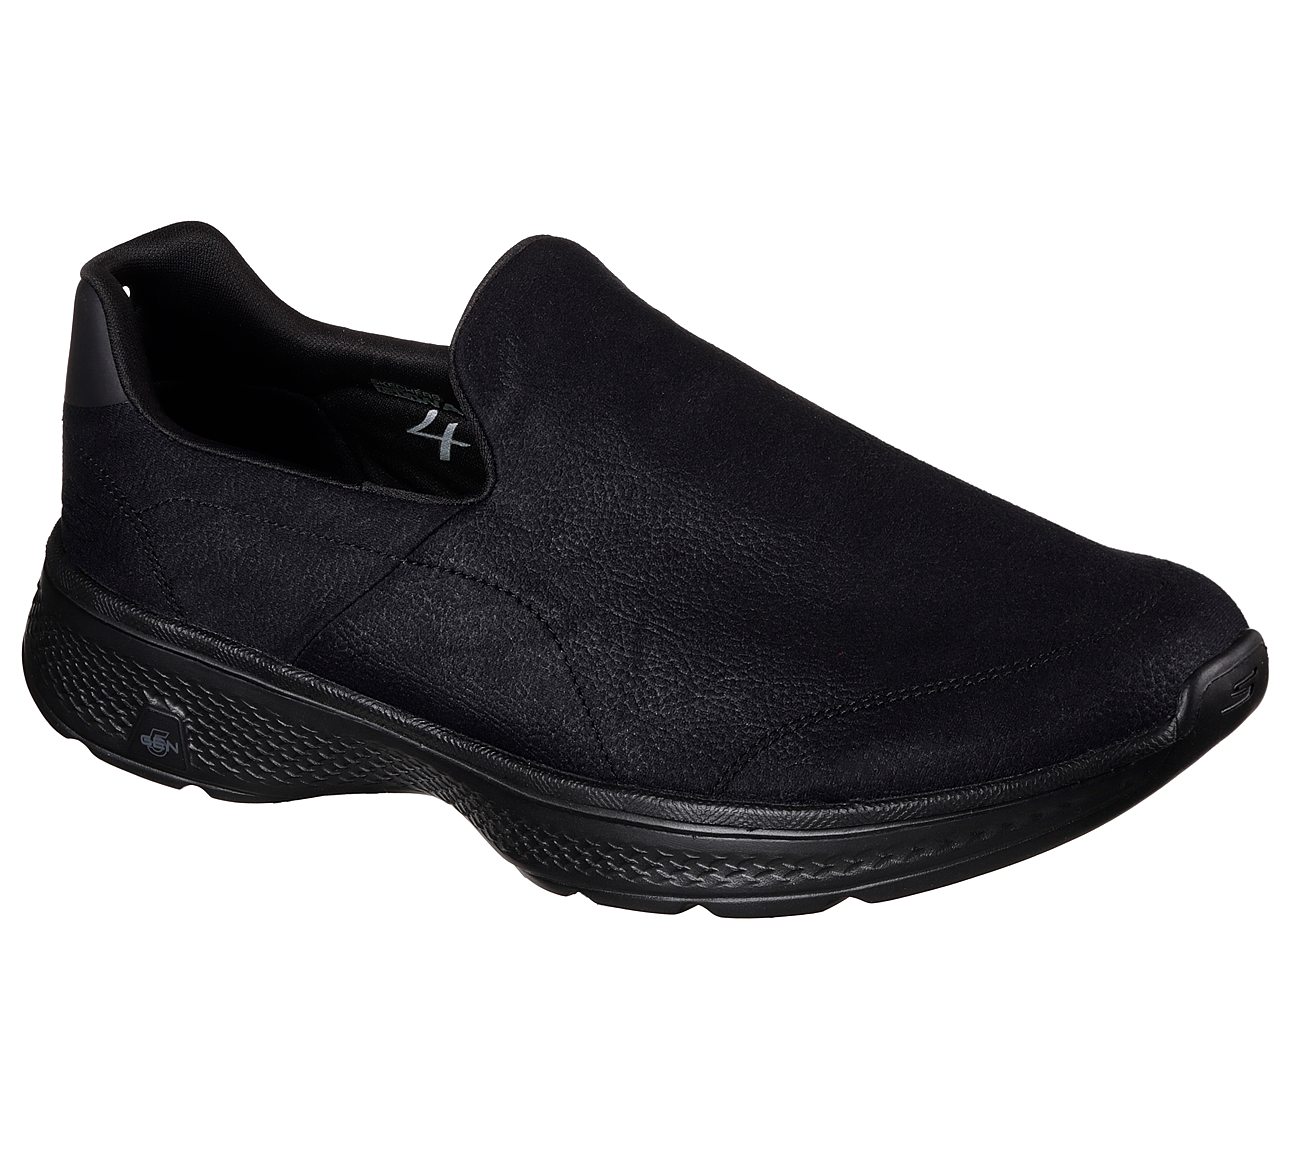 GO WALK 4 - REMARKABLE, BBLACK Footwear Lateral View